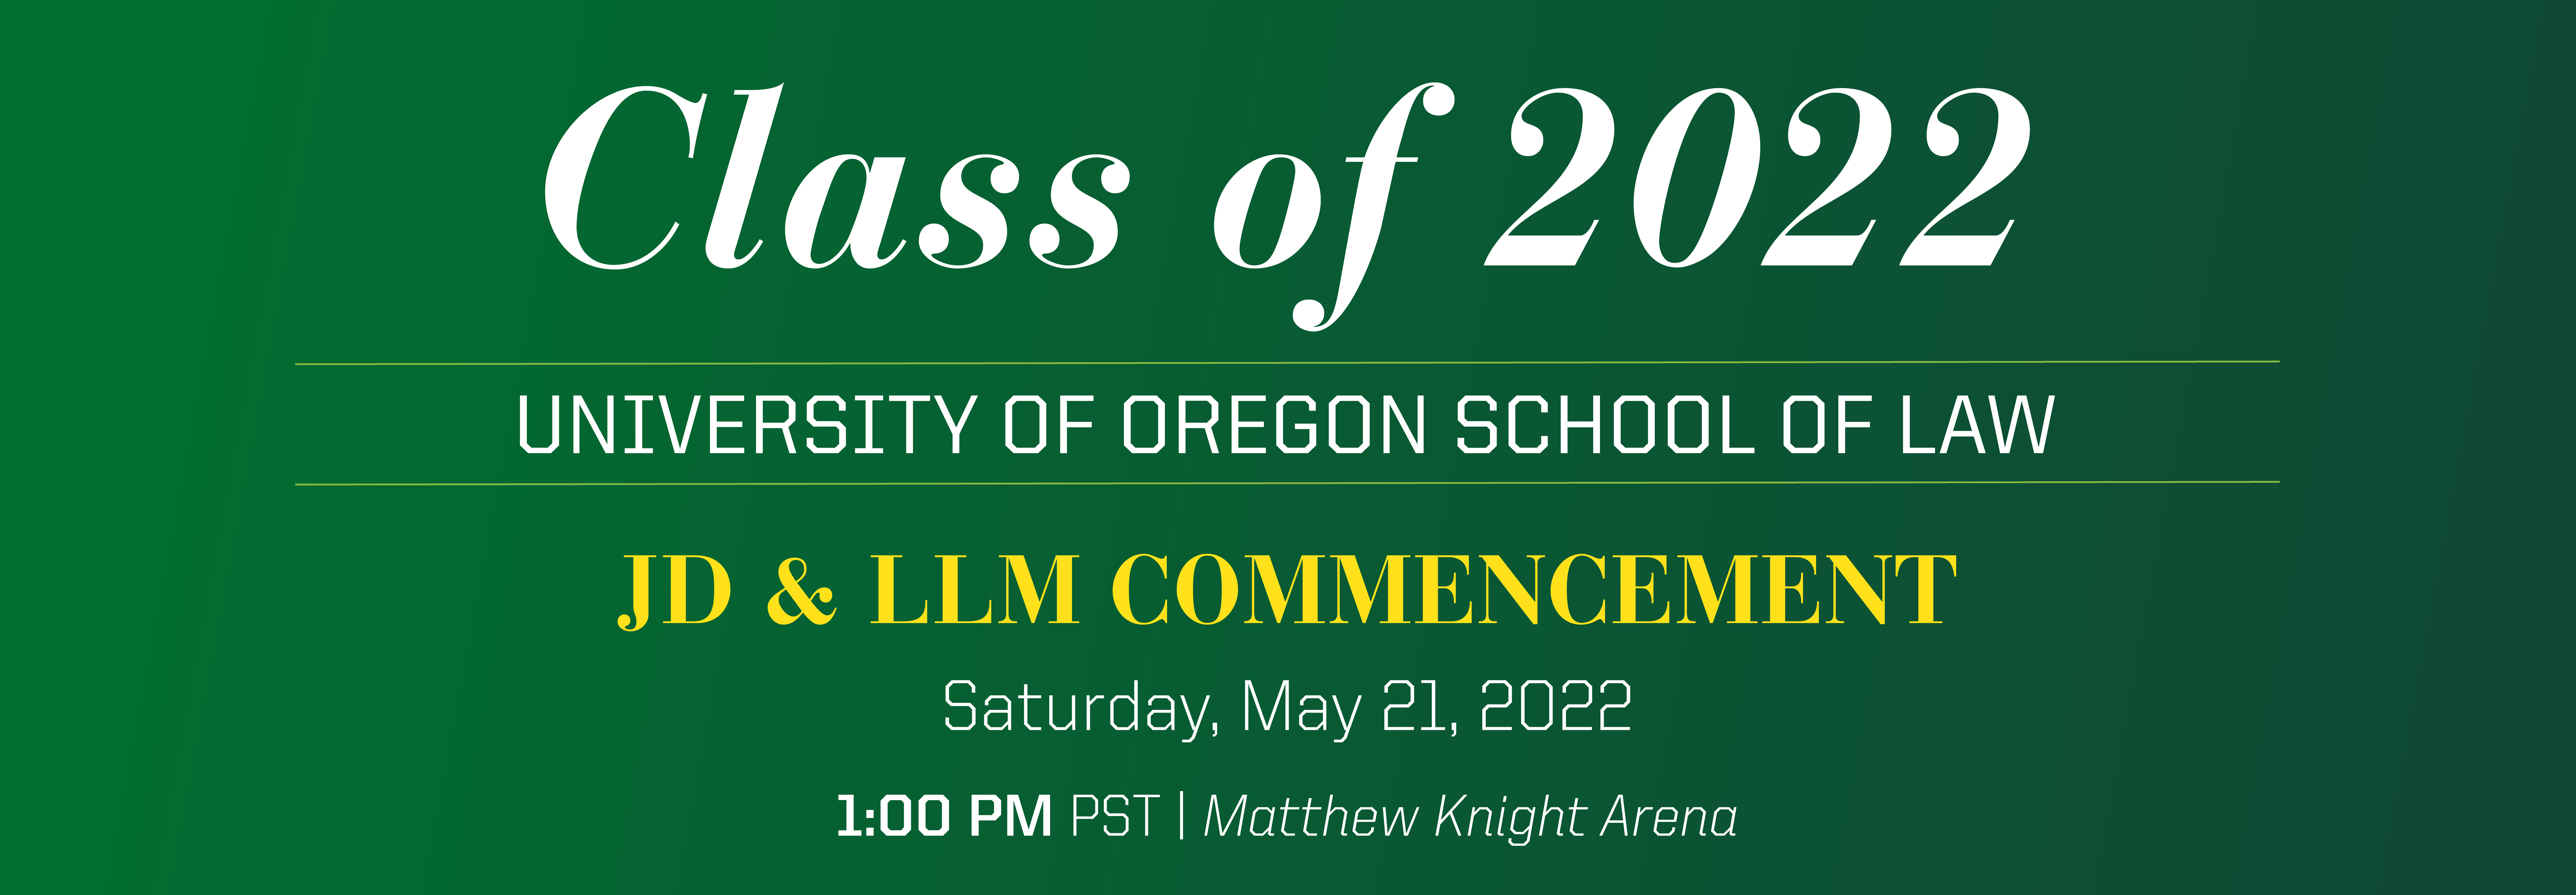 Class of 2022 JD and LLM Commencement Saturday May 21, 2022 Matthew Knight Arena